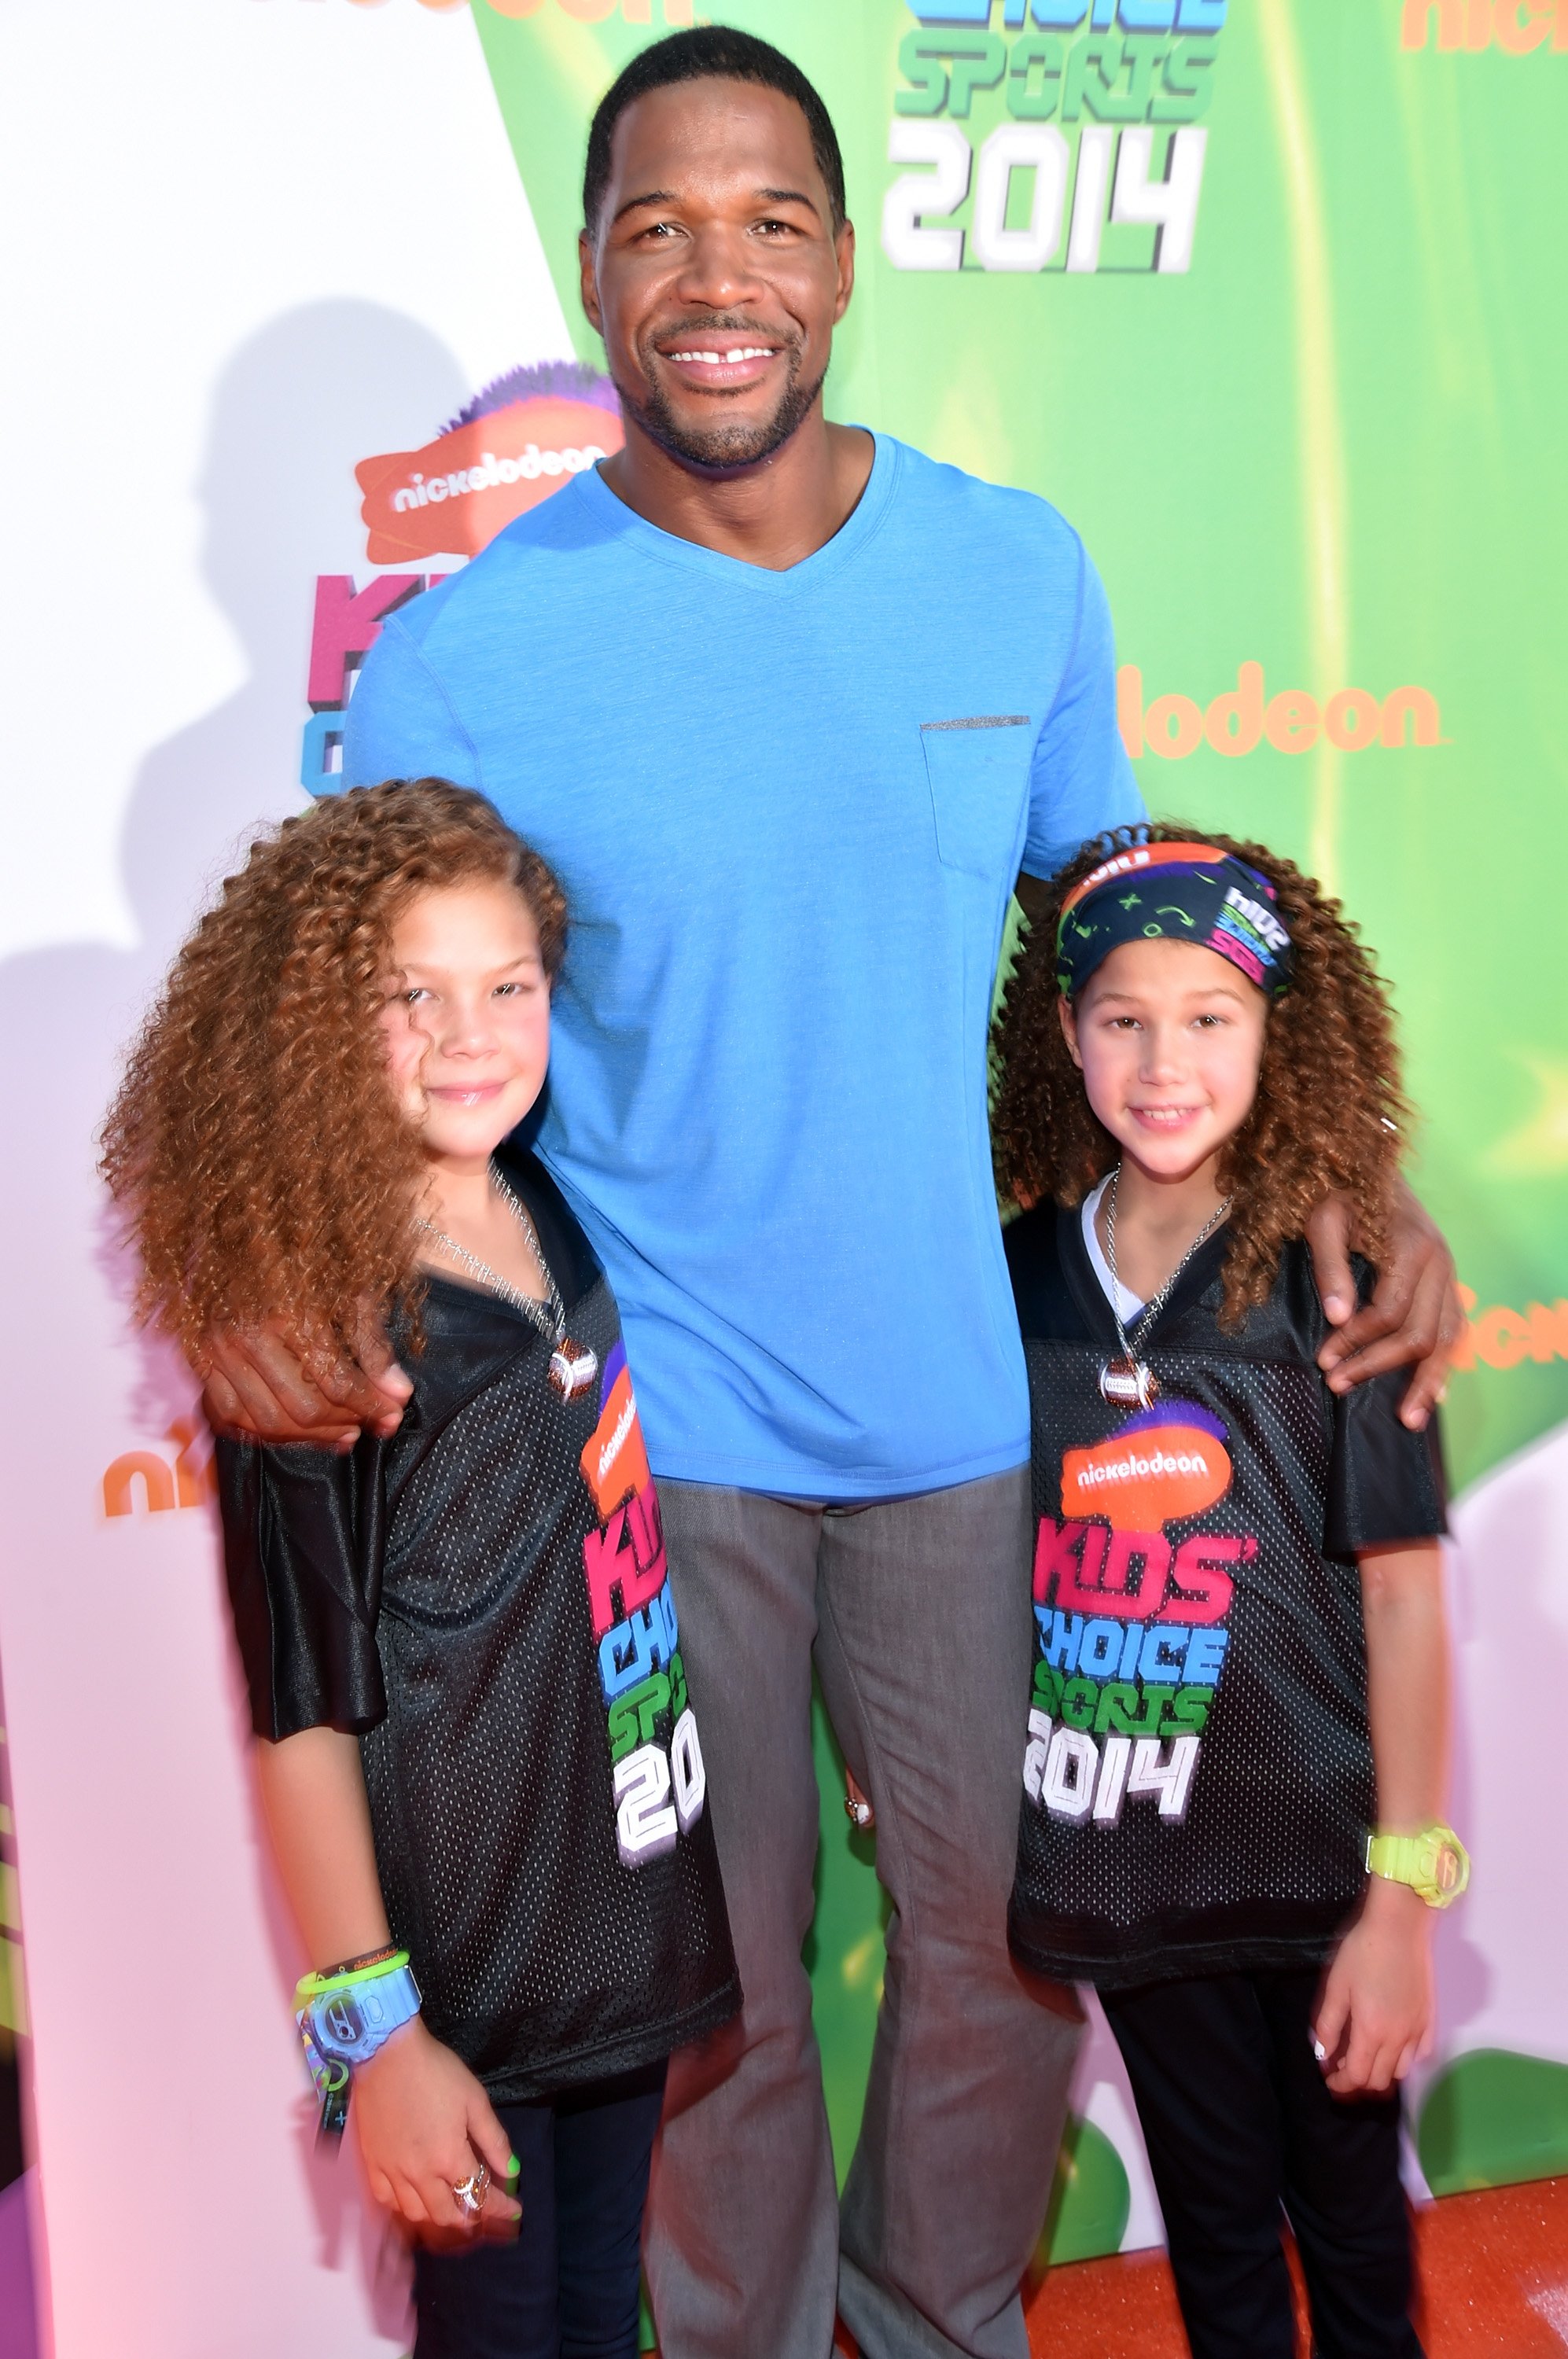 Michael Strahan, with daughters Sophia Strahan and Isabella Strahan, attend Nickelodeon Kids' Choice Sports Awards 2014 at UCLA's Pauley Pavilion on July 17, 2014, in Los Angeles, California. | Source: Getty Images